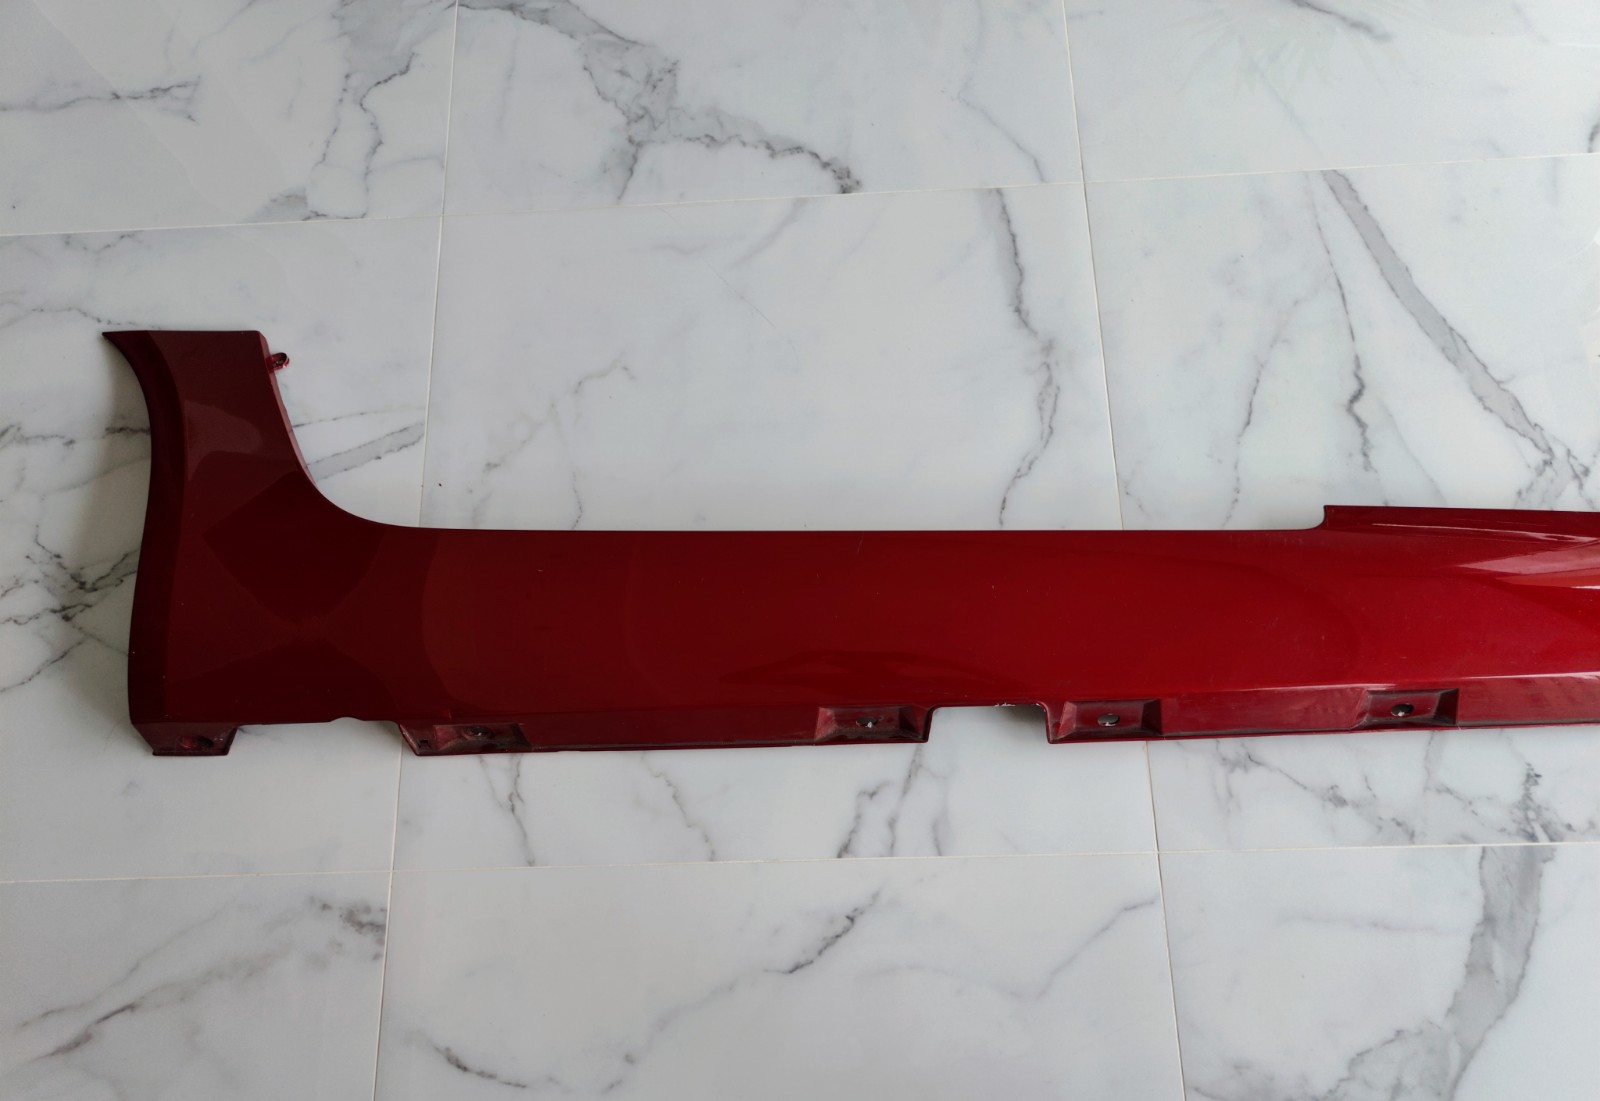 Mercedes AMG GT GTS 1906980454 Sill Cover skirt Right